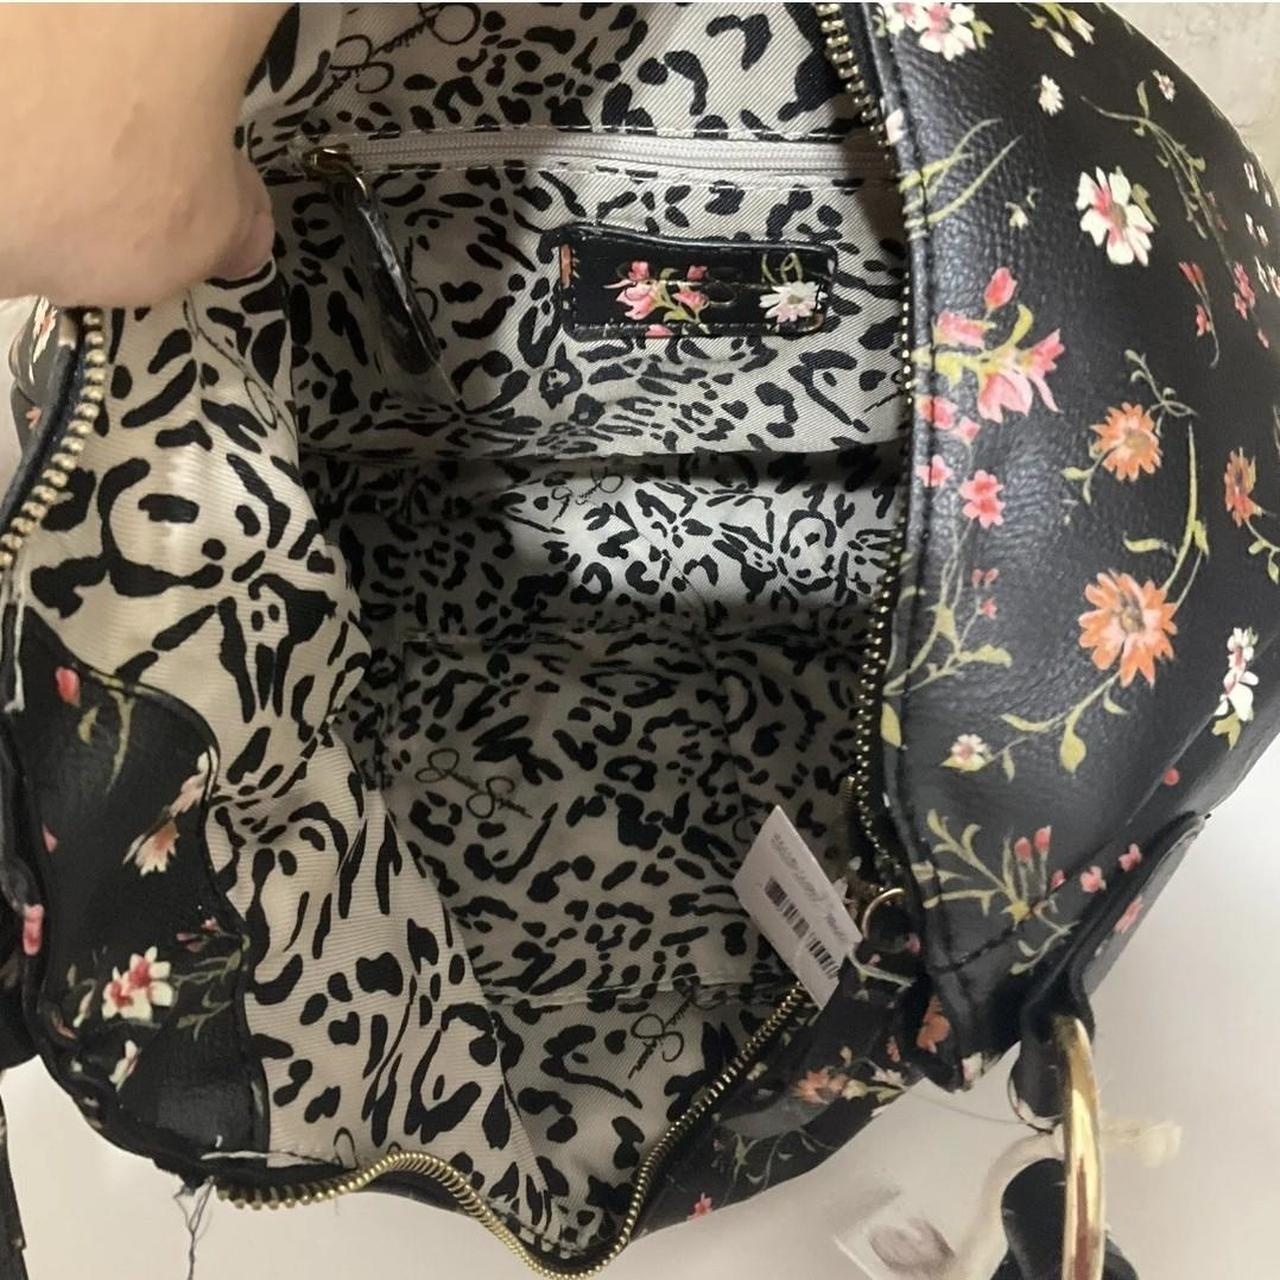 Jessica Simpson Cody Black Floral Natalie Hobo Purse NWT - $80 New With  Tags - From Silvia